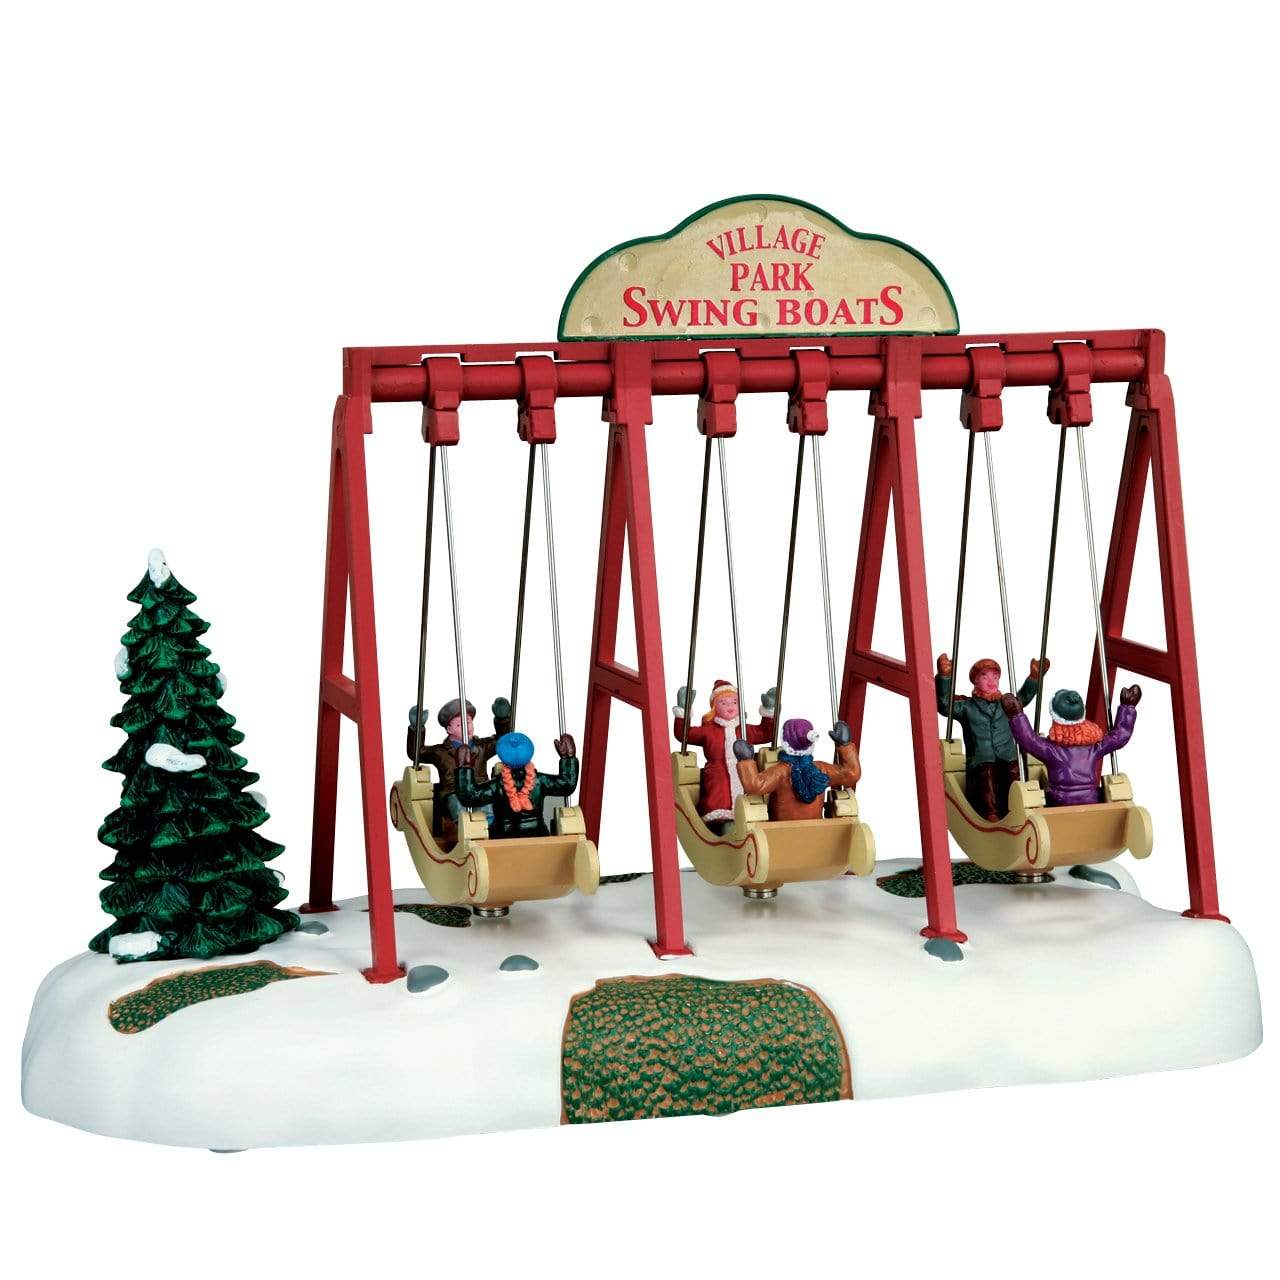 Lemax Table Pieces Lemax Swing Boats, Christmas Village Table Pieces, B/O(4.5V)